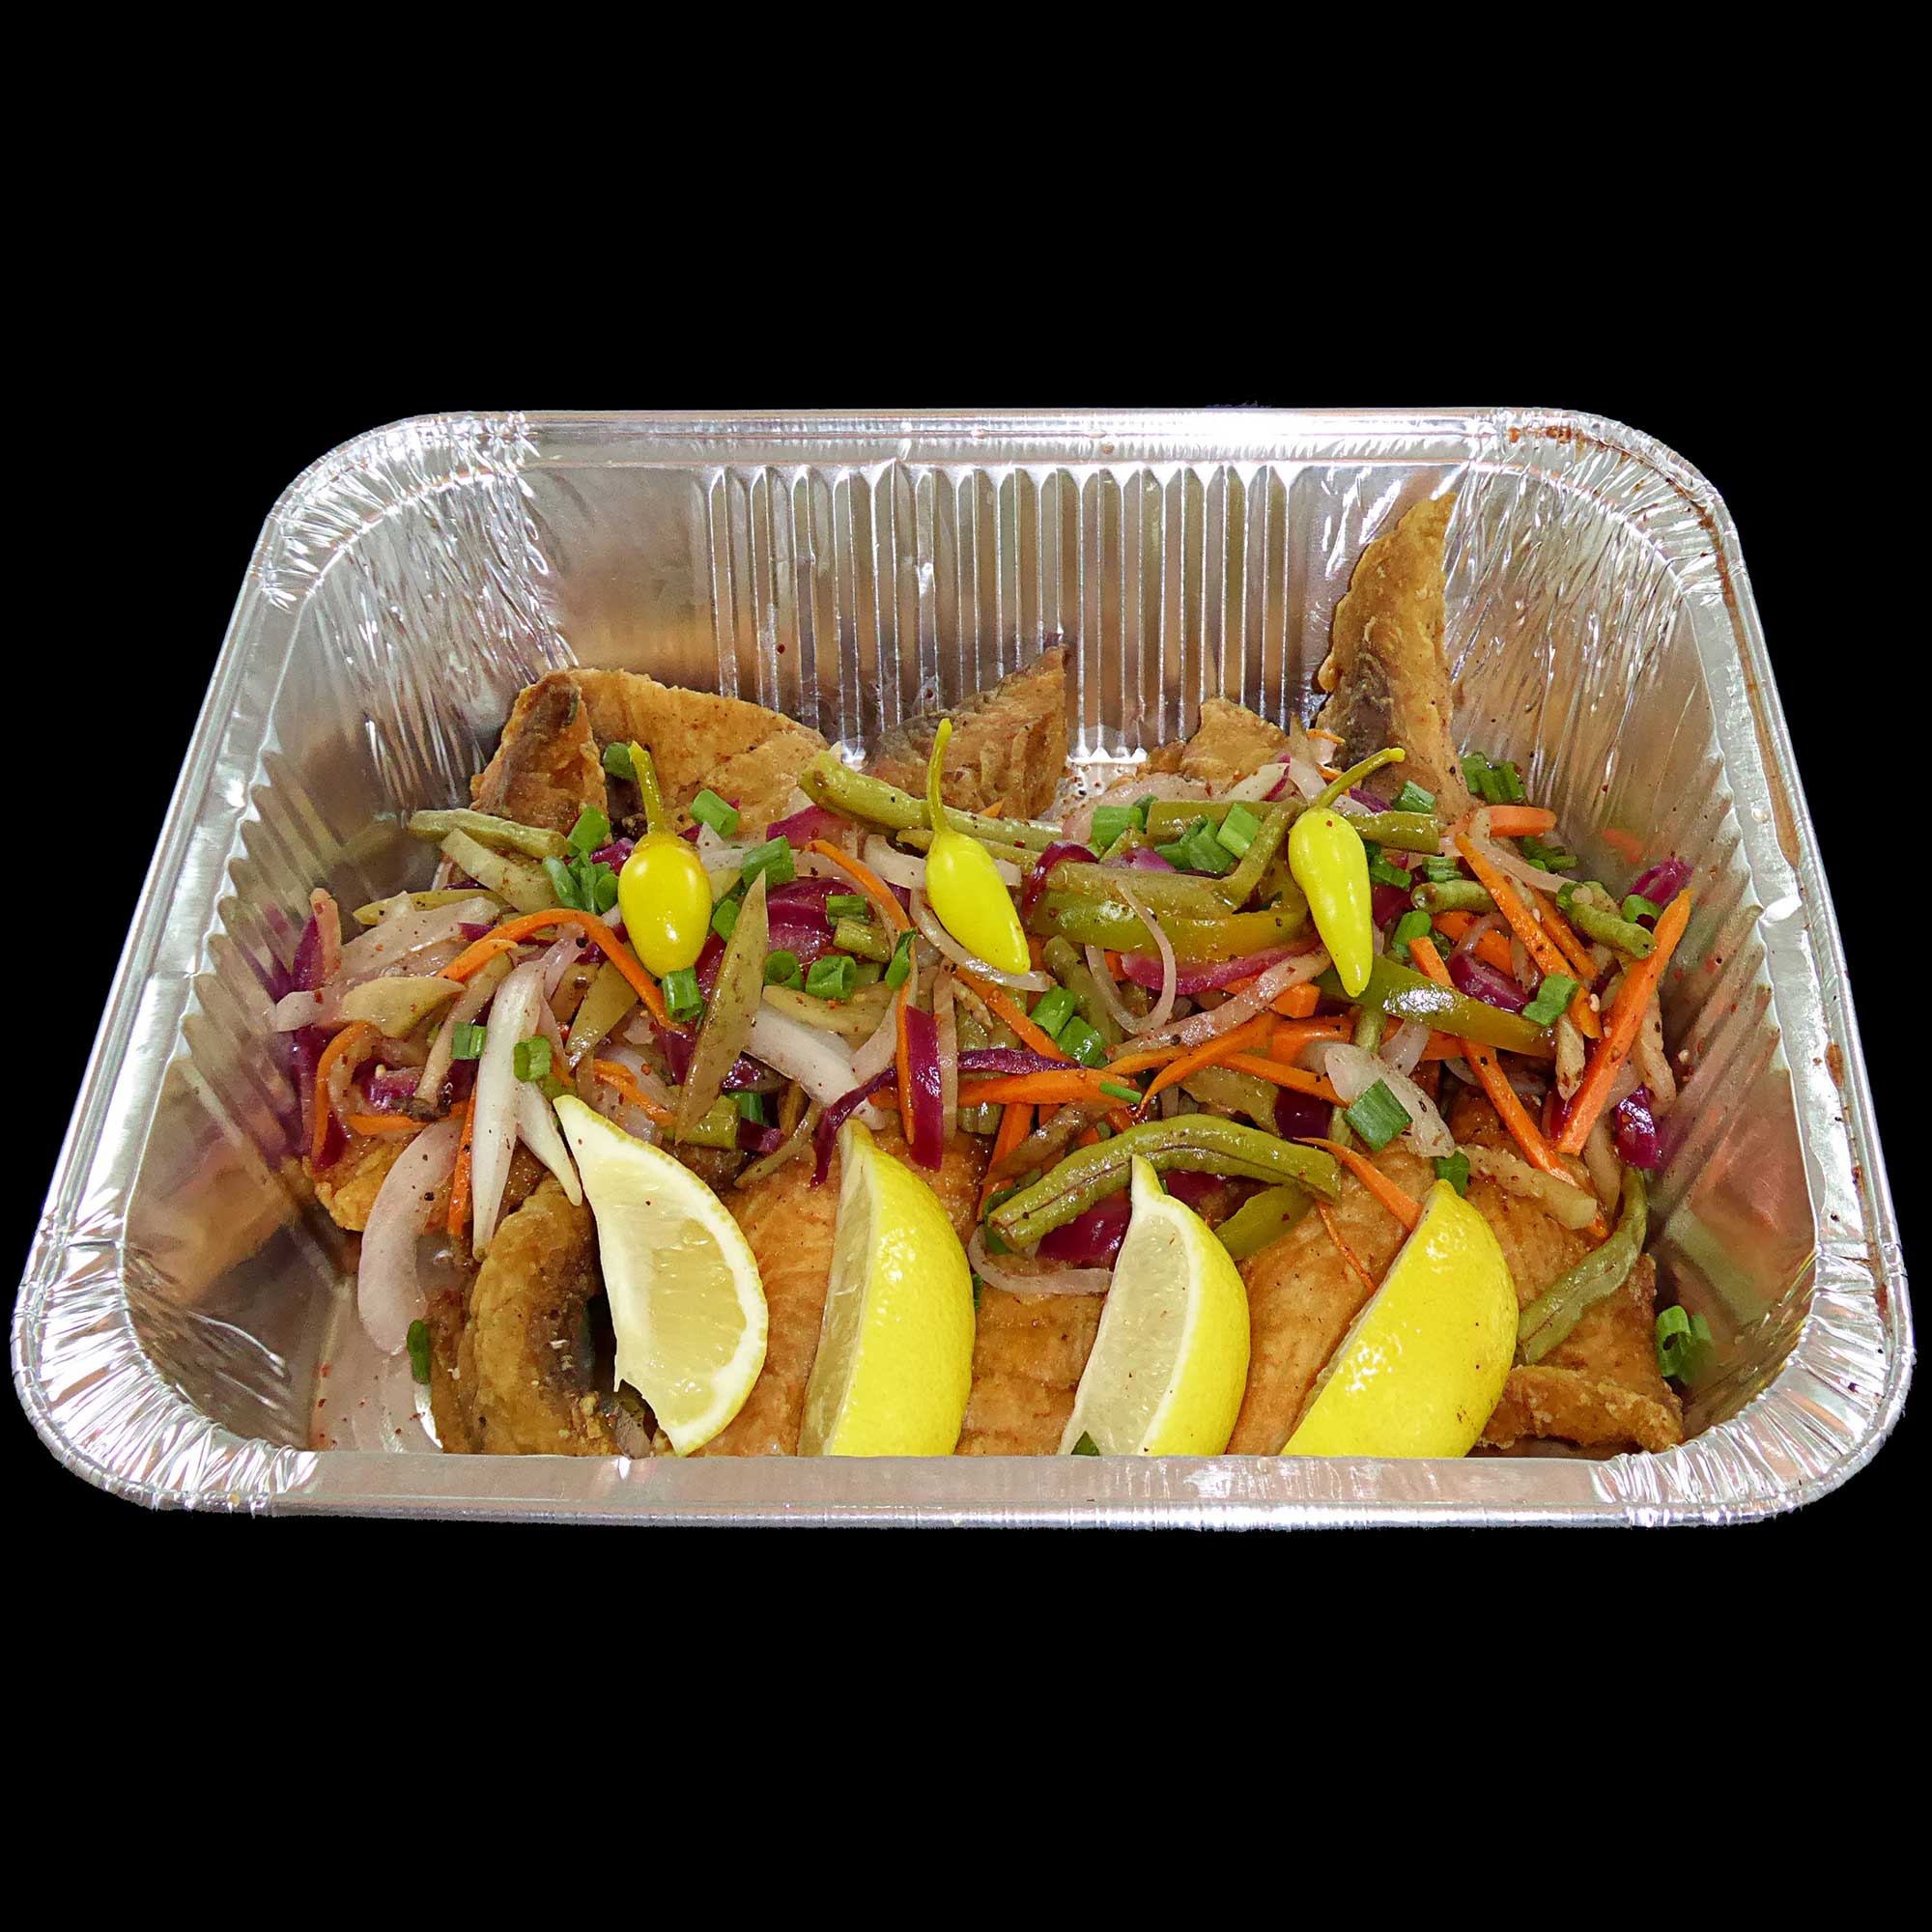 Serious Fish Fry&nbsp;&nbsp;<strong style="font-size: 20px;"><span style="color: rgb(255, 0, 0);"><span style="font-family: Calibri, sans-serif;">New!</span></span></strong>